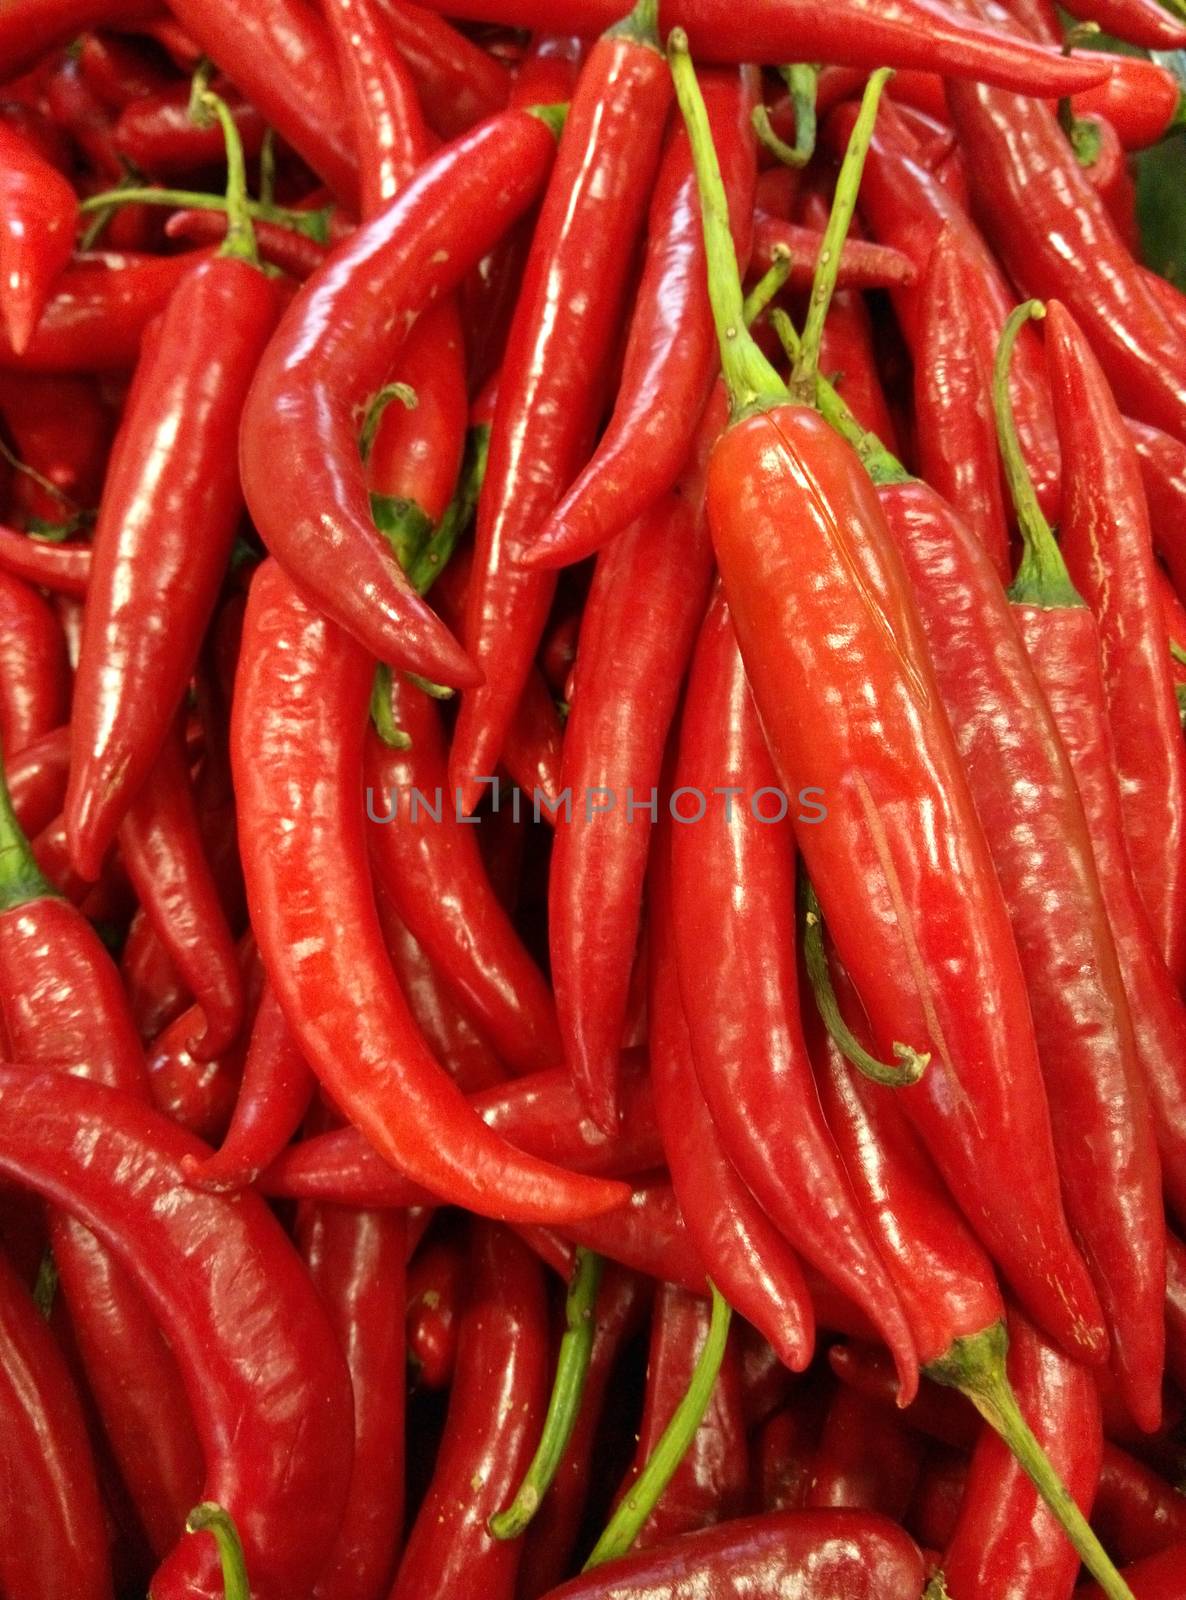 Green and Red Chillies are used extensively in many parts of Indian cuisine.